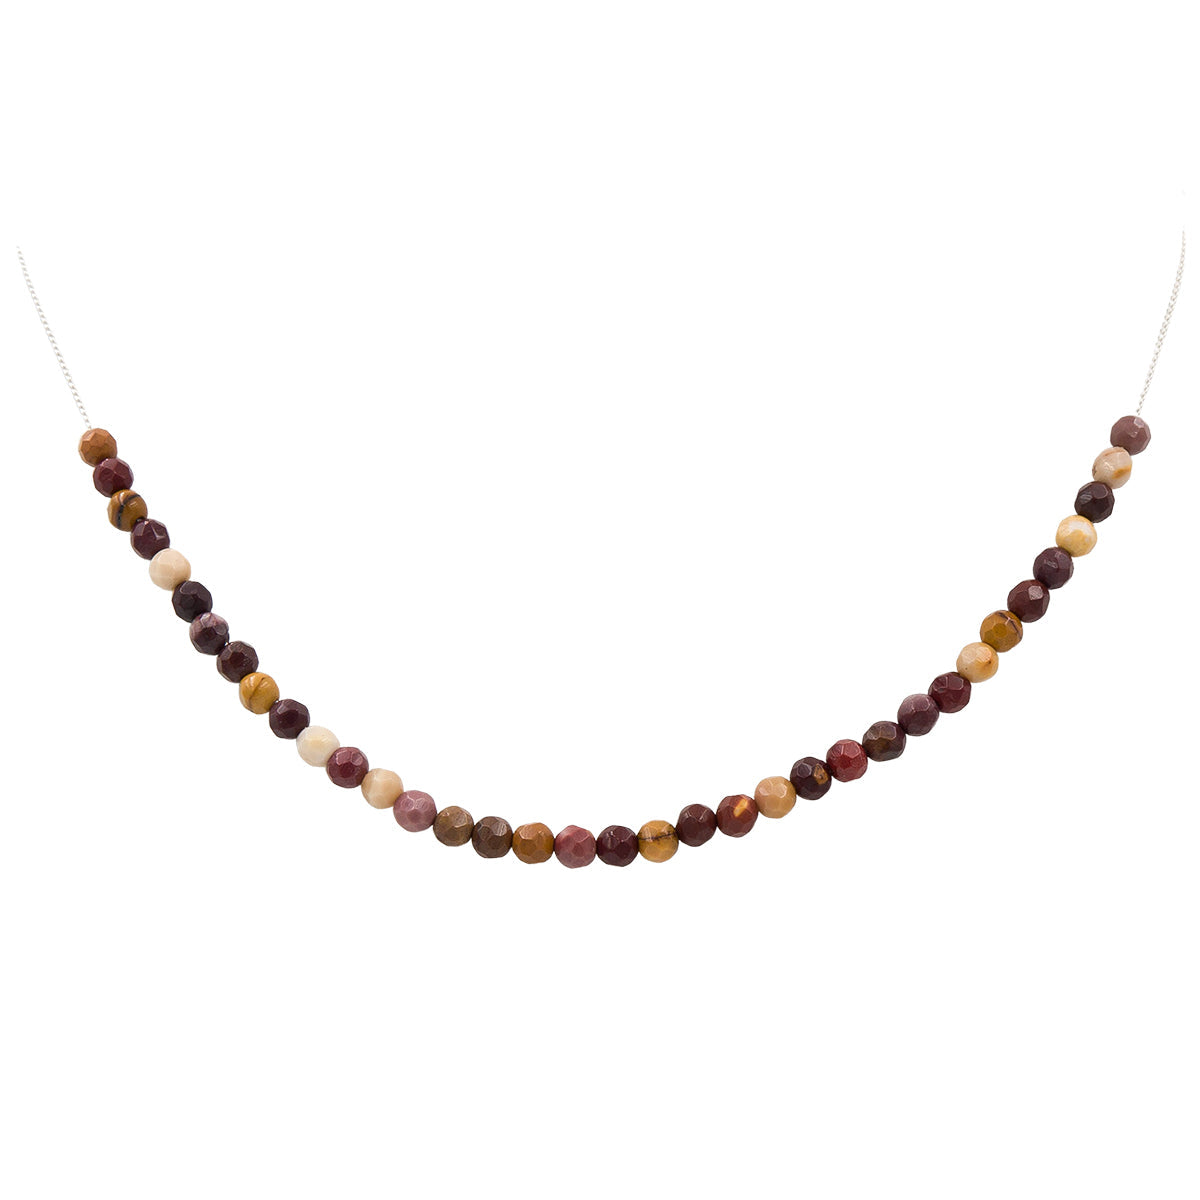 Handmade Mookaite Sterling Silver Necklace | Adjustable Length | Eco-Friendly Jewelry